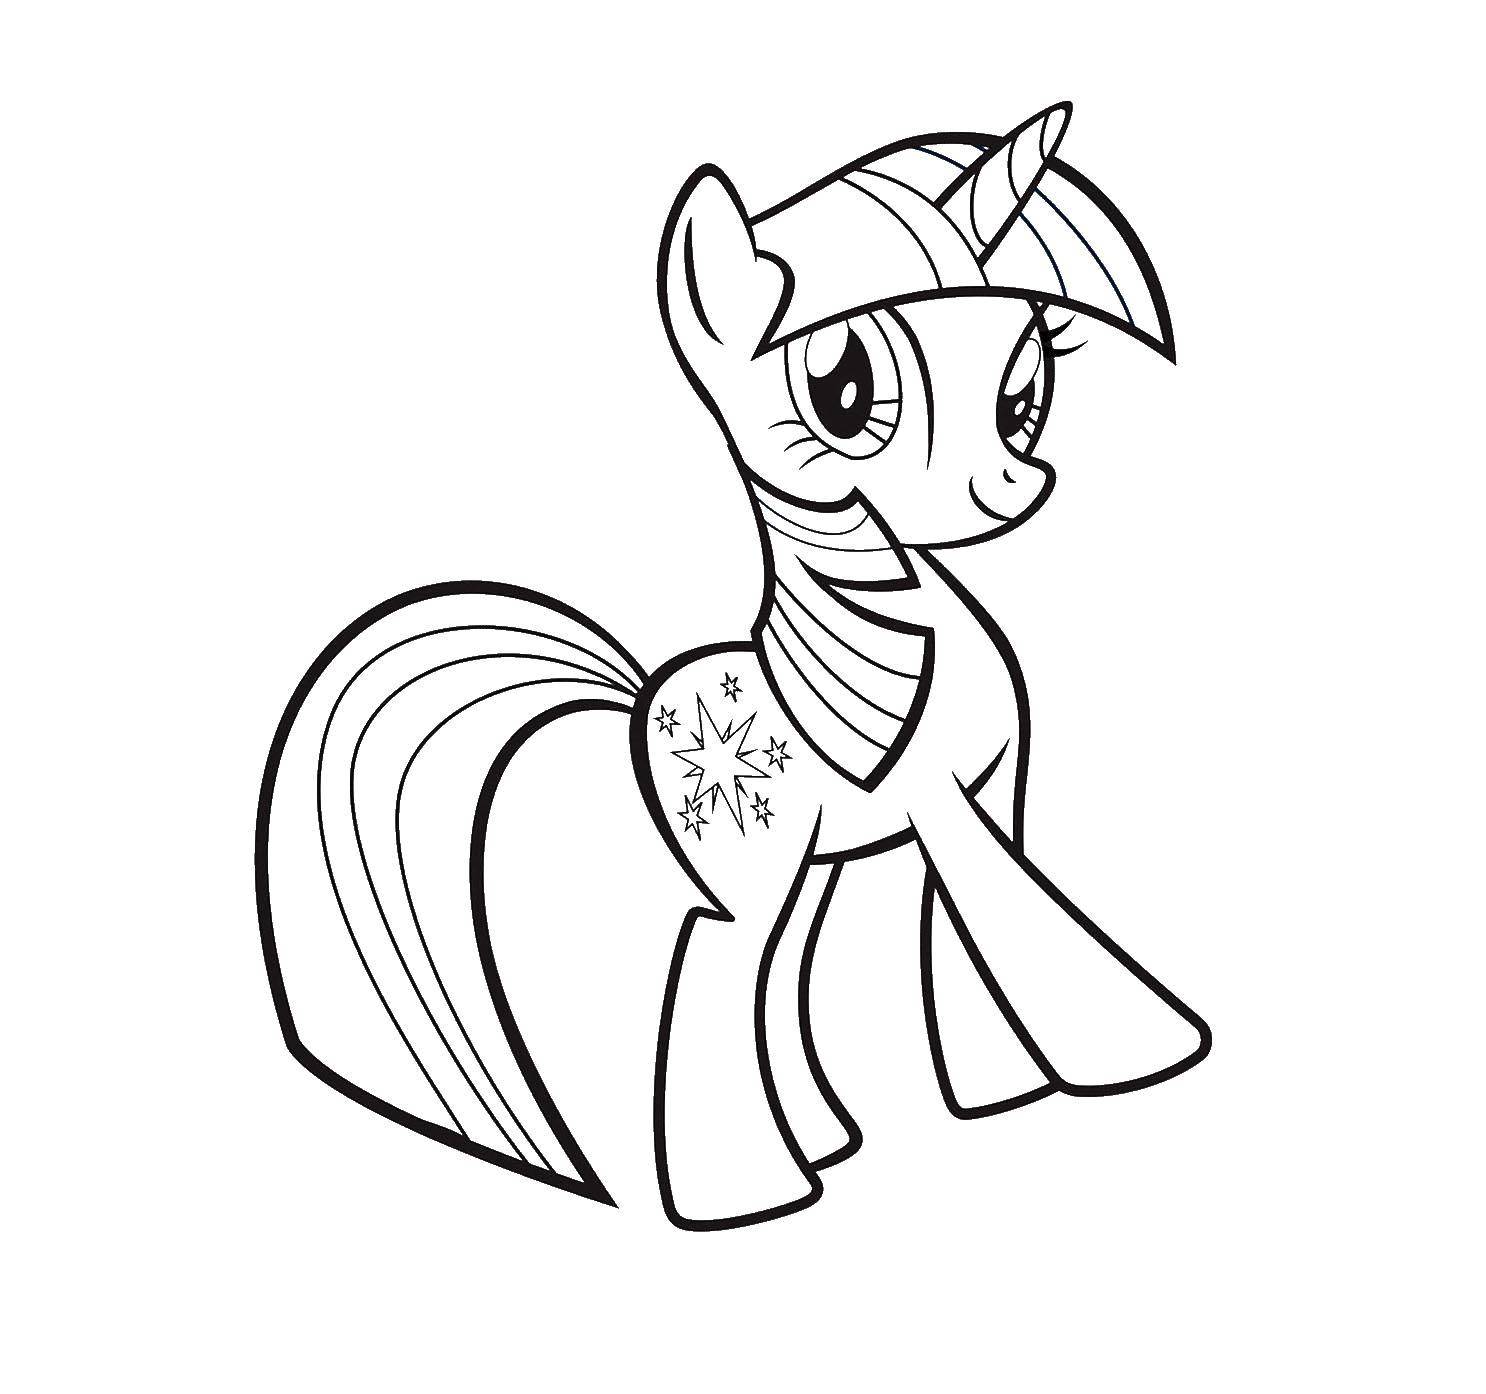 Coloring Beautiful pony. Category my little pony. Tags:  Pony, My little pony.